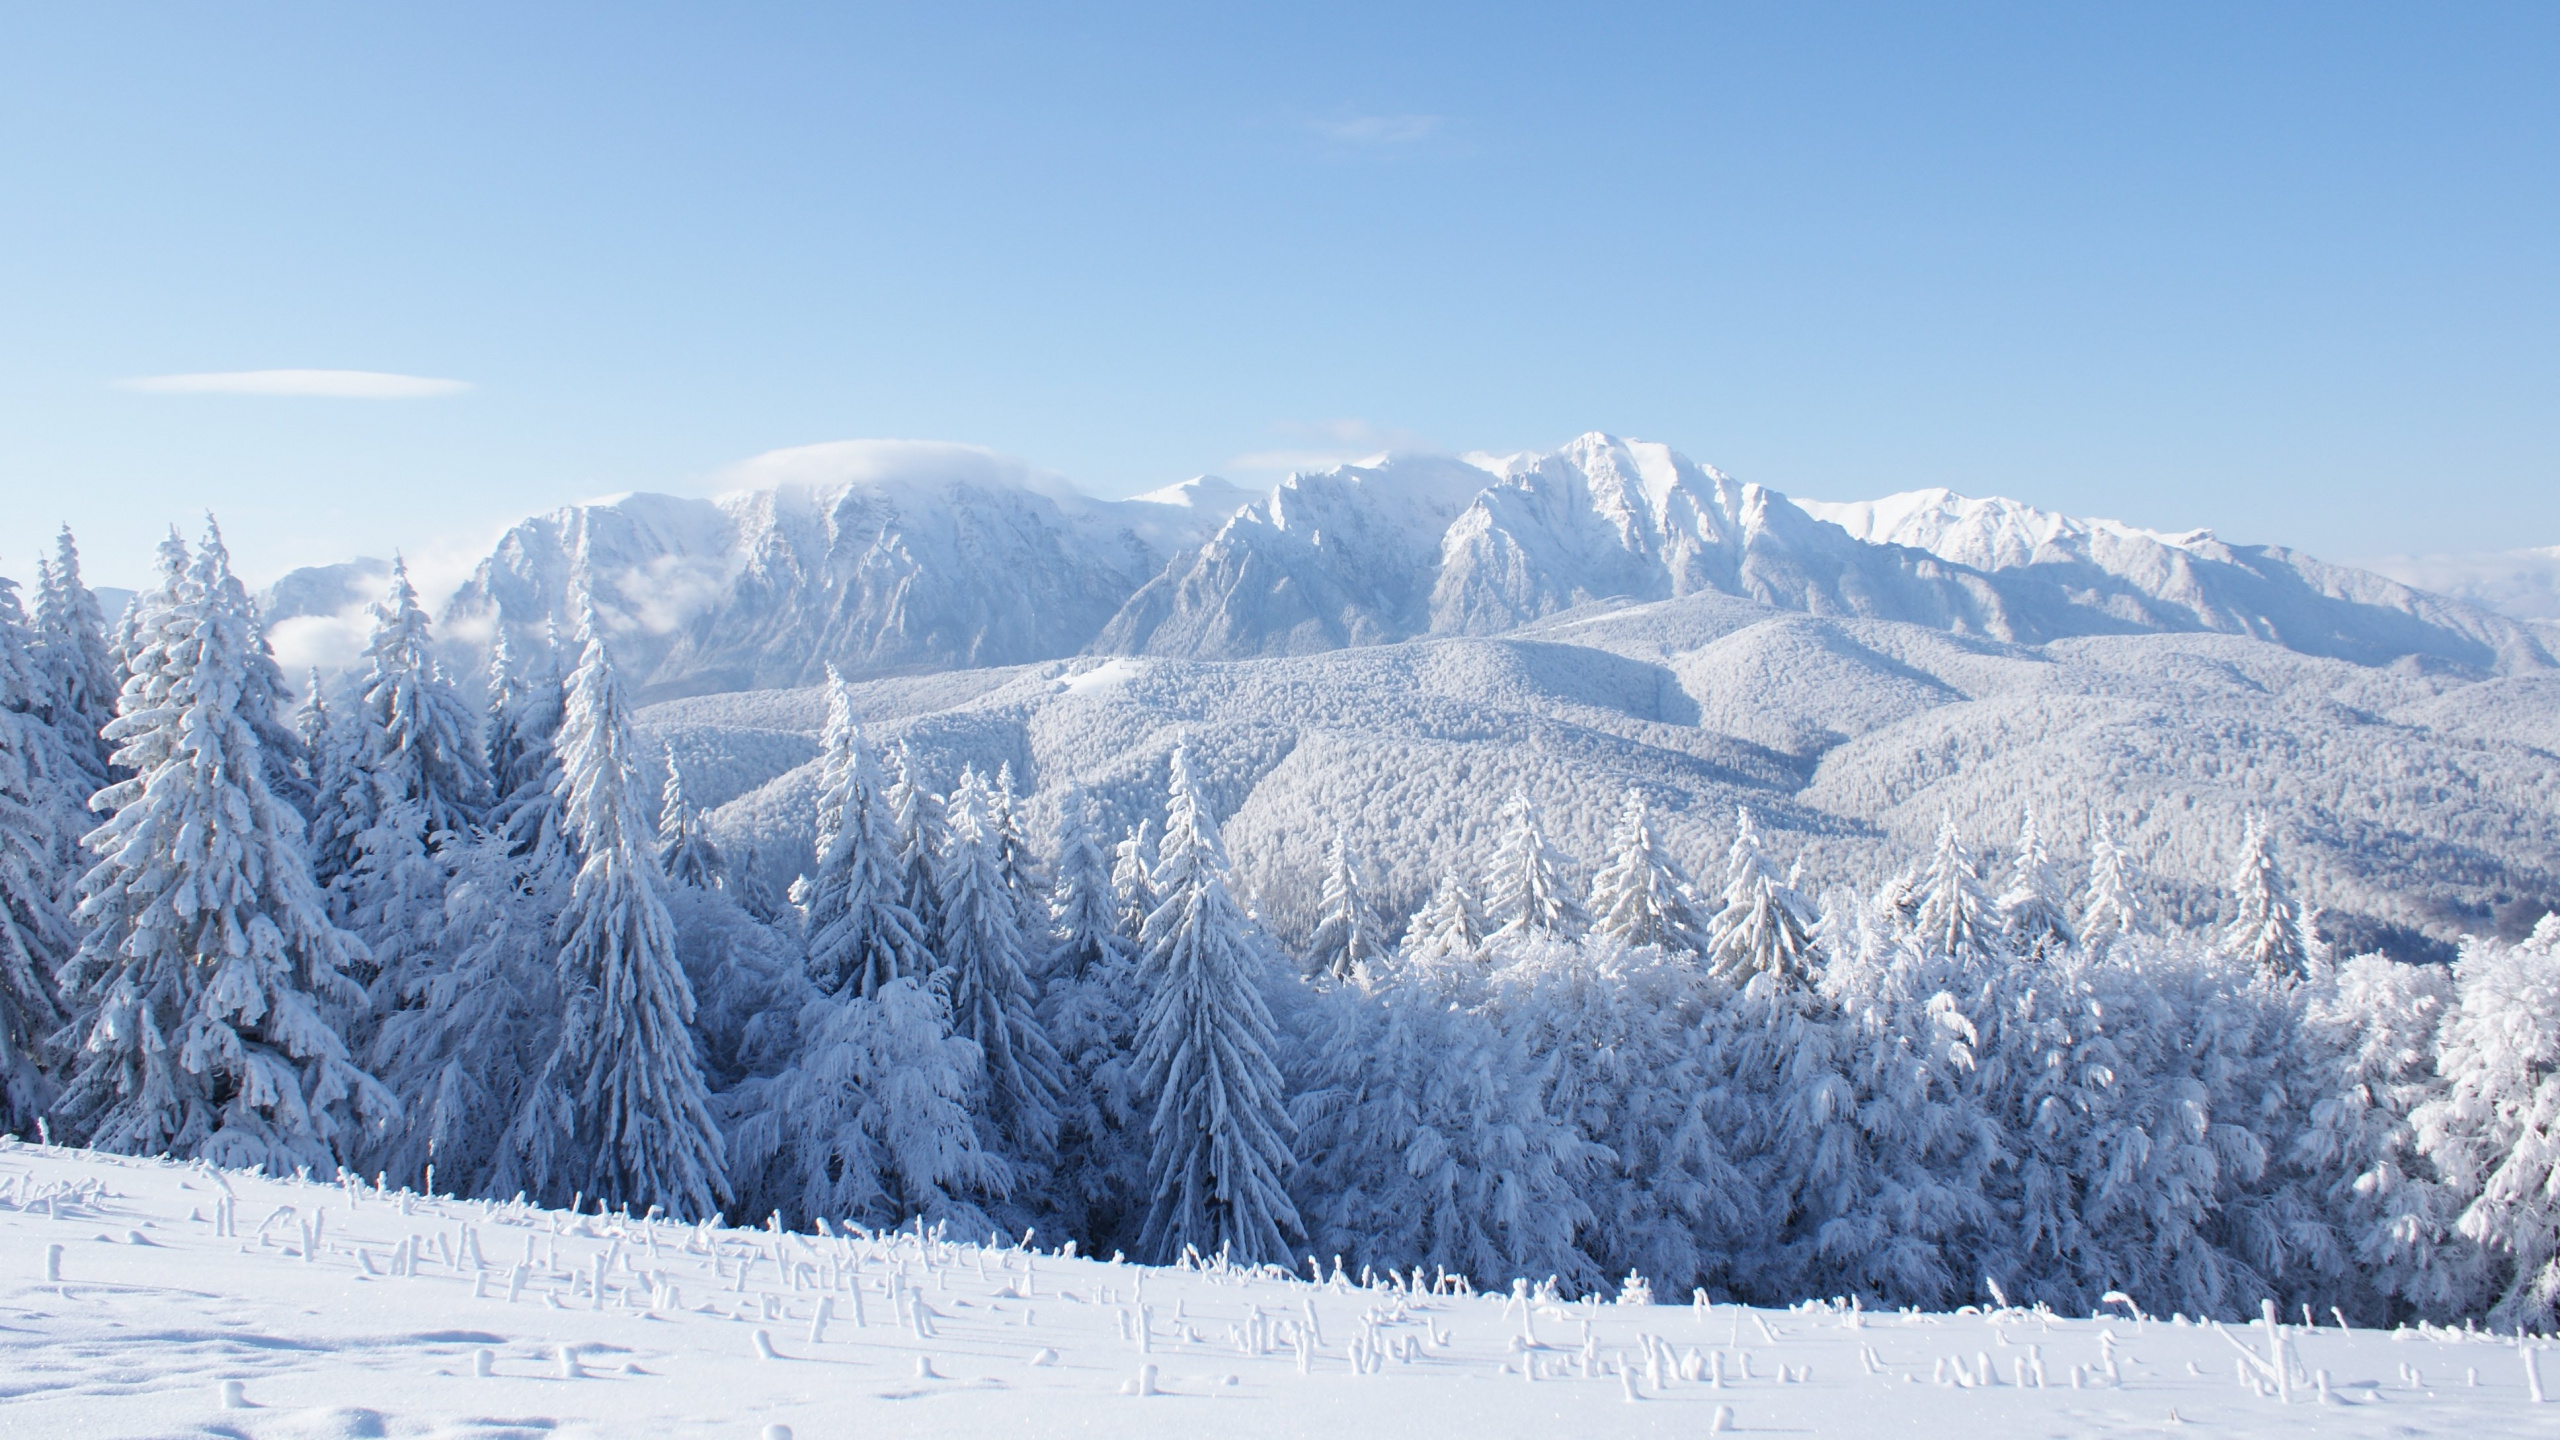 Snow Covered Pine Trees and Mountains During Daytime. Wallpaper in 2560x1440 Resolution